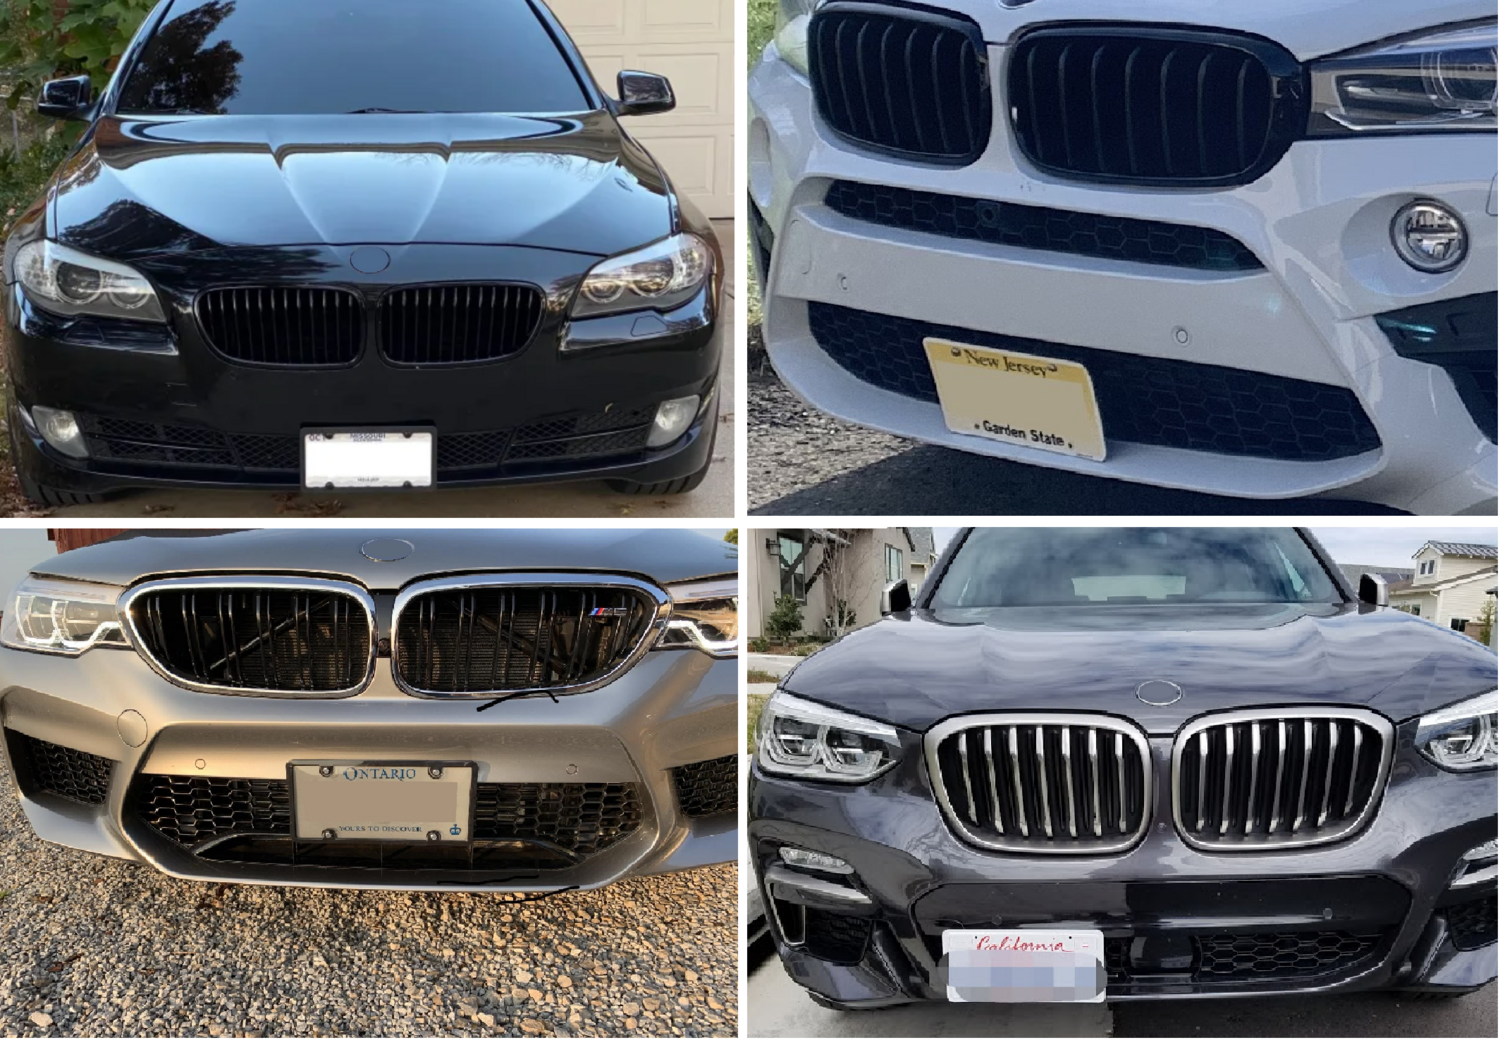 SLY BRACKET FOR BMW MODELS WITH MESH STYLE LOWER GRILLE